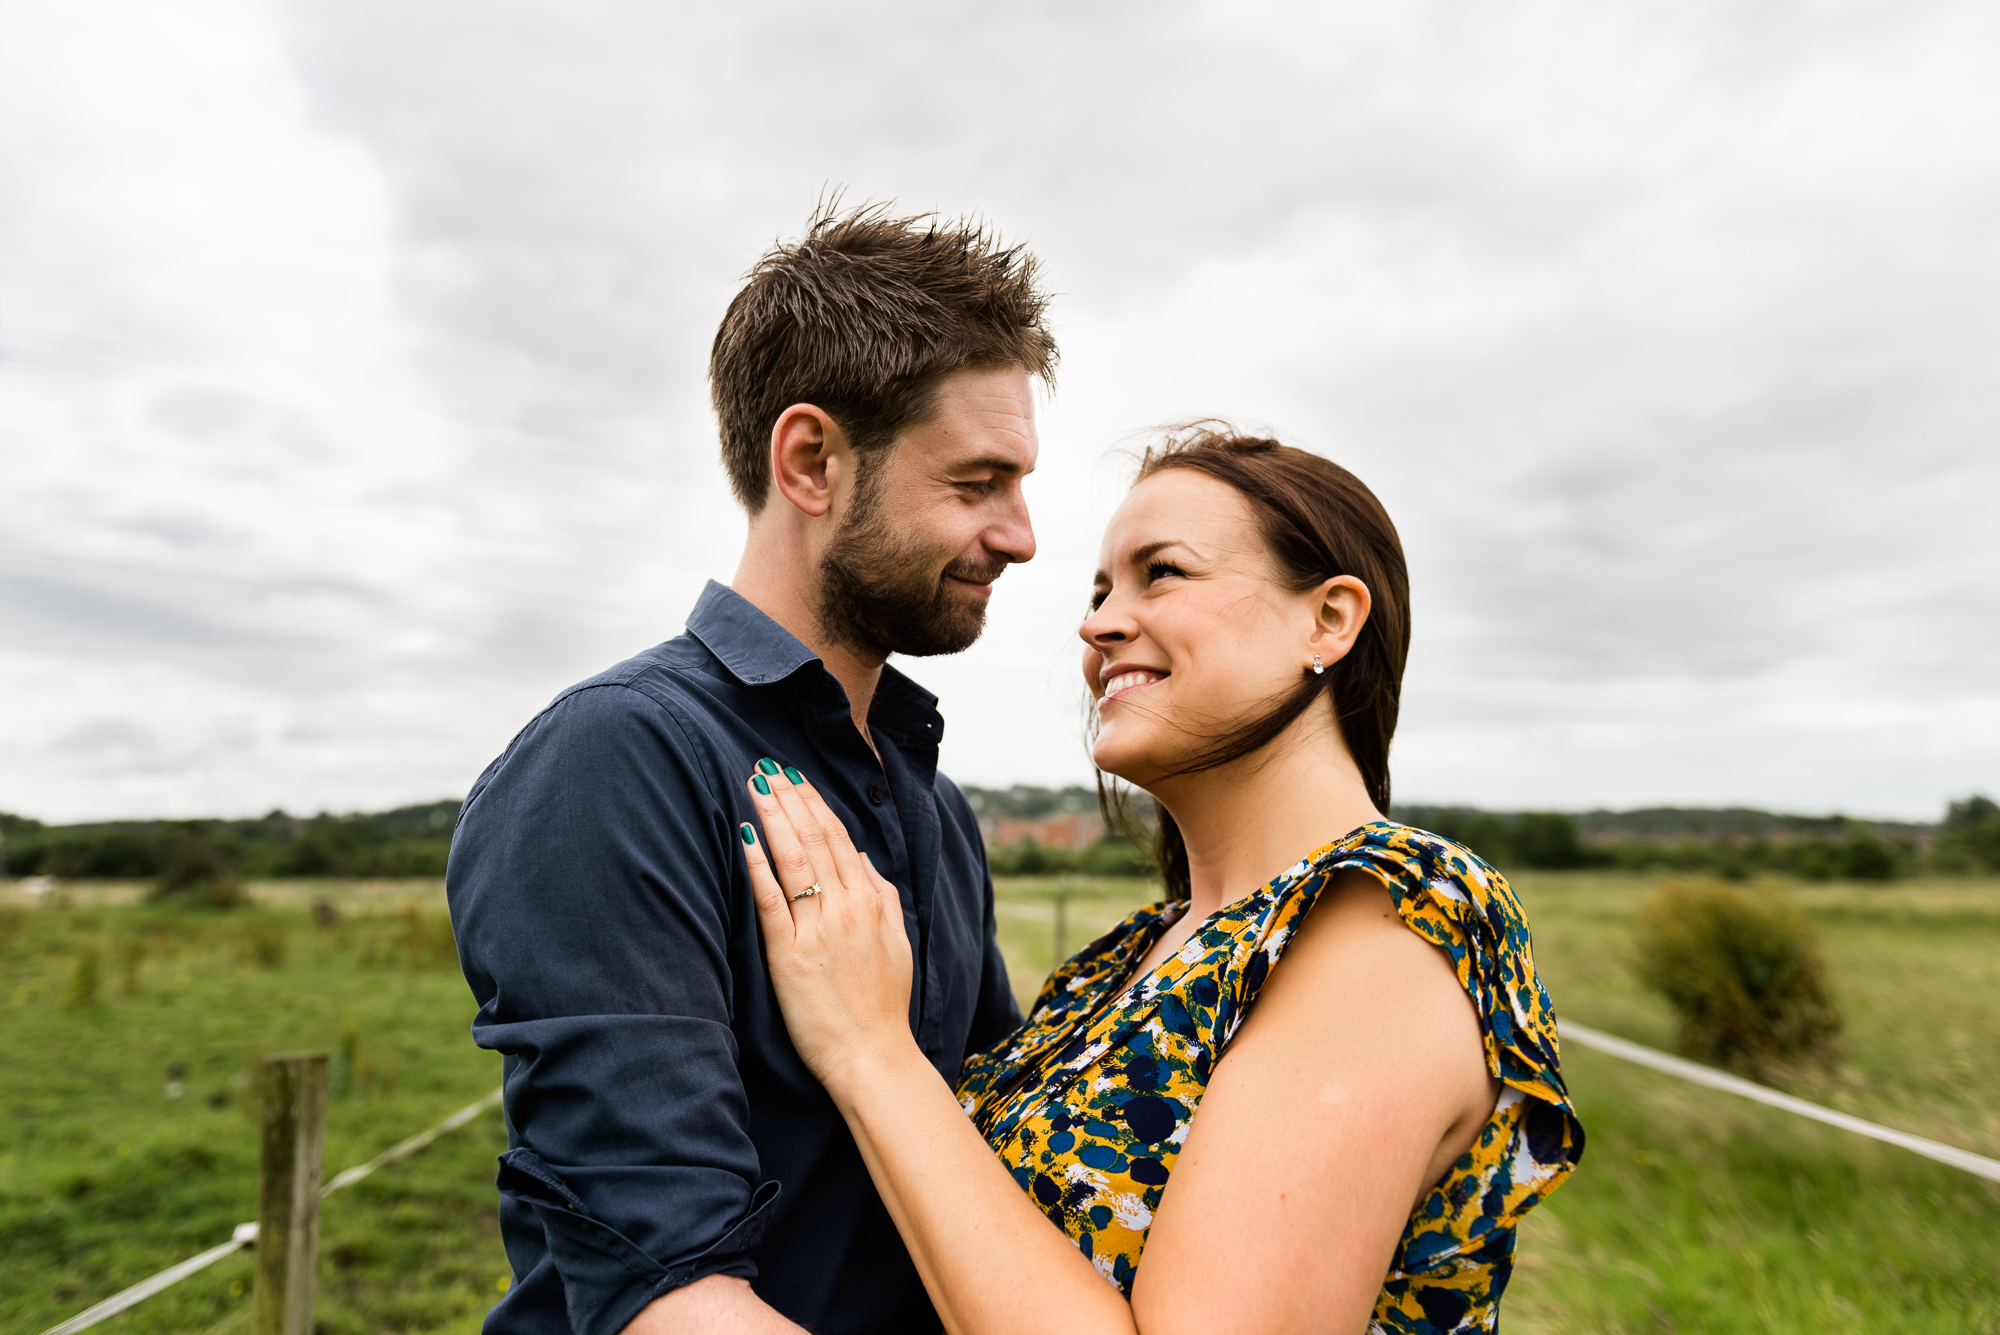 Pre-Wedding Session Engagement Photos Couple Shoot English countryside Canal - Jenny Harper Photography-8.jpg